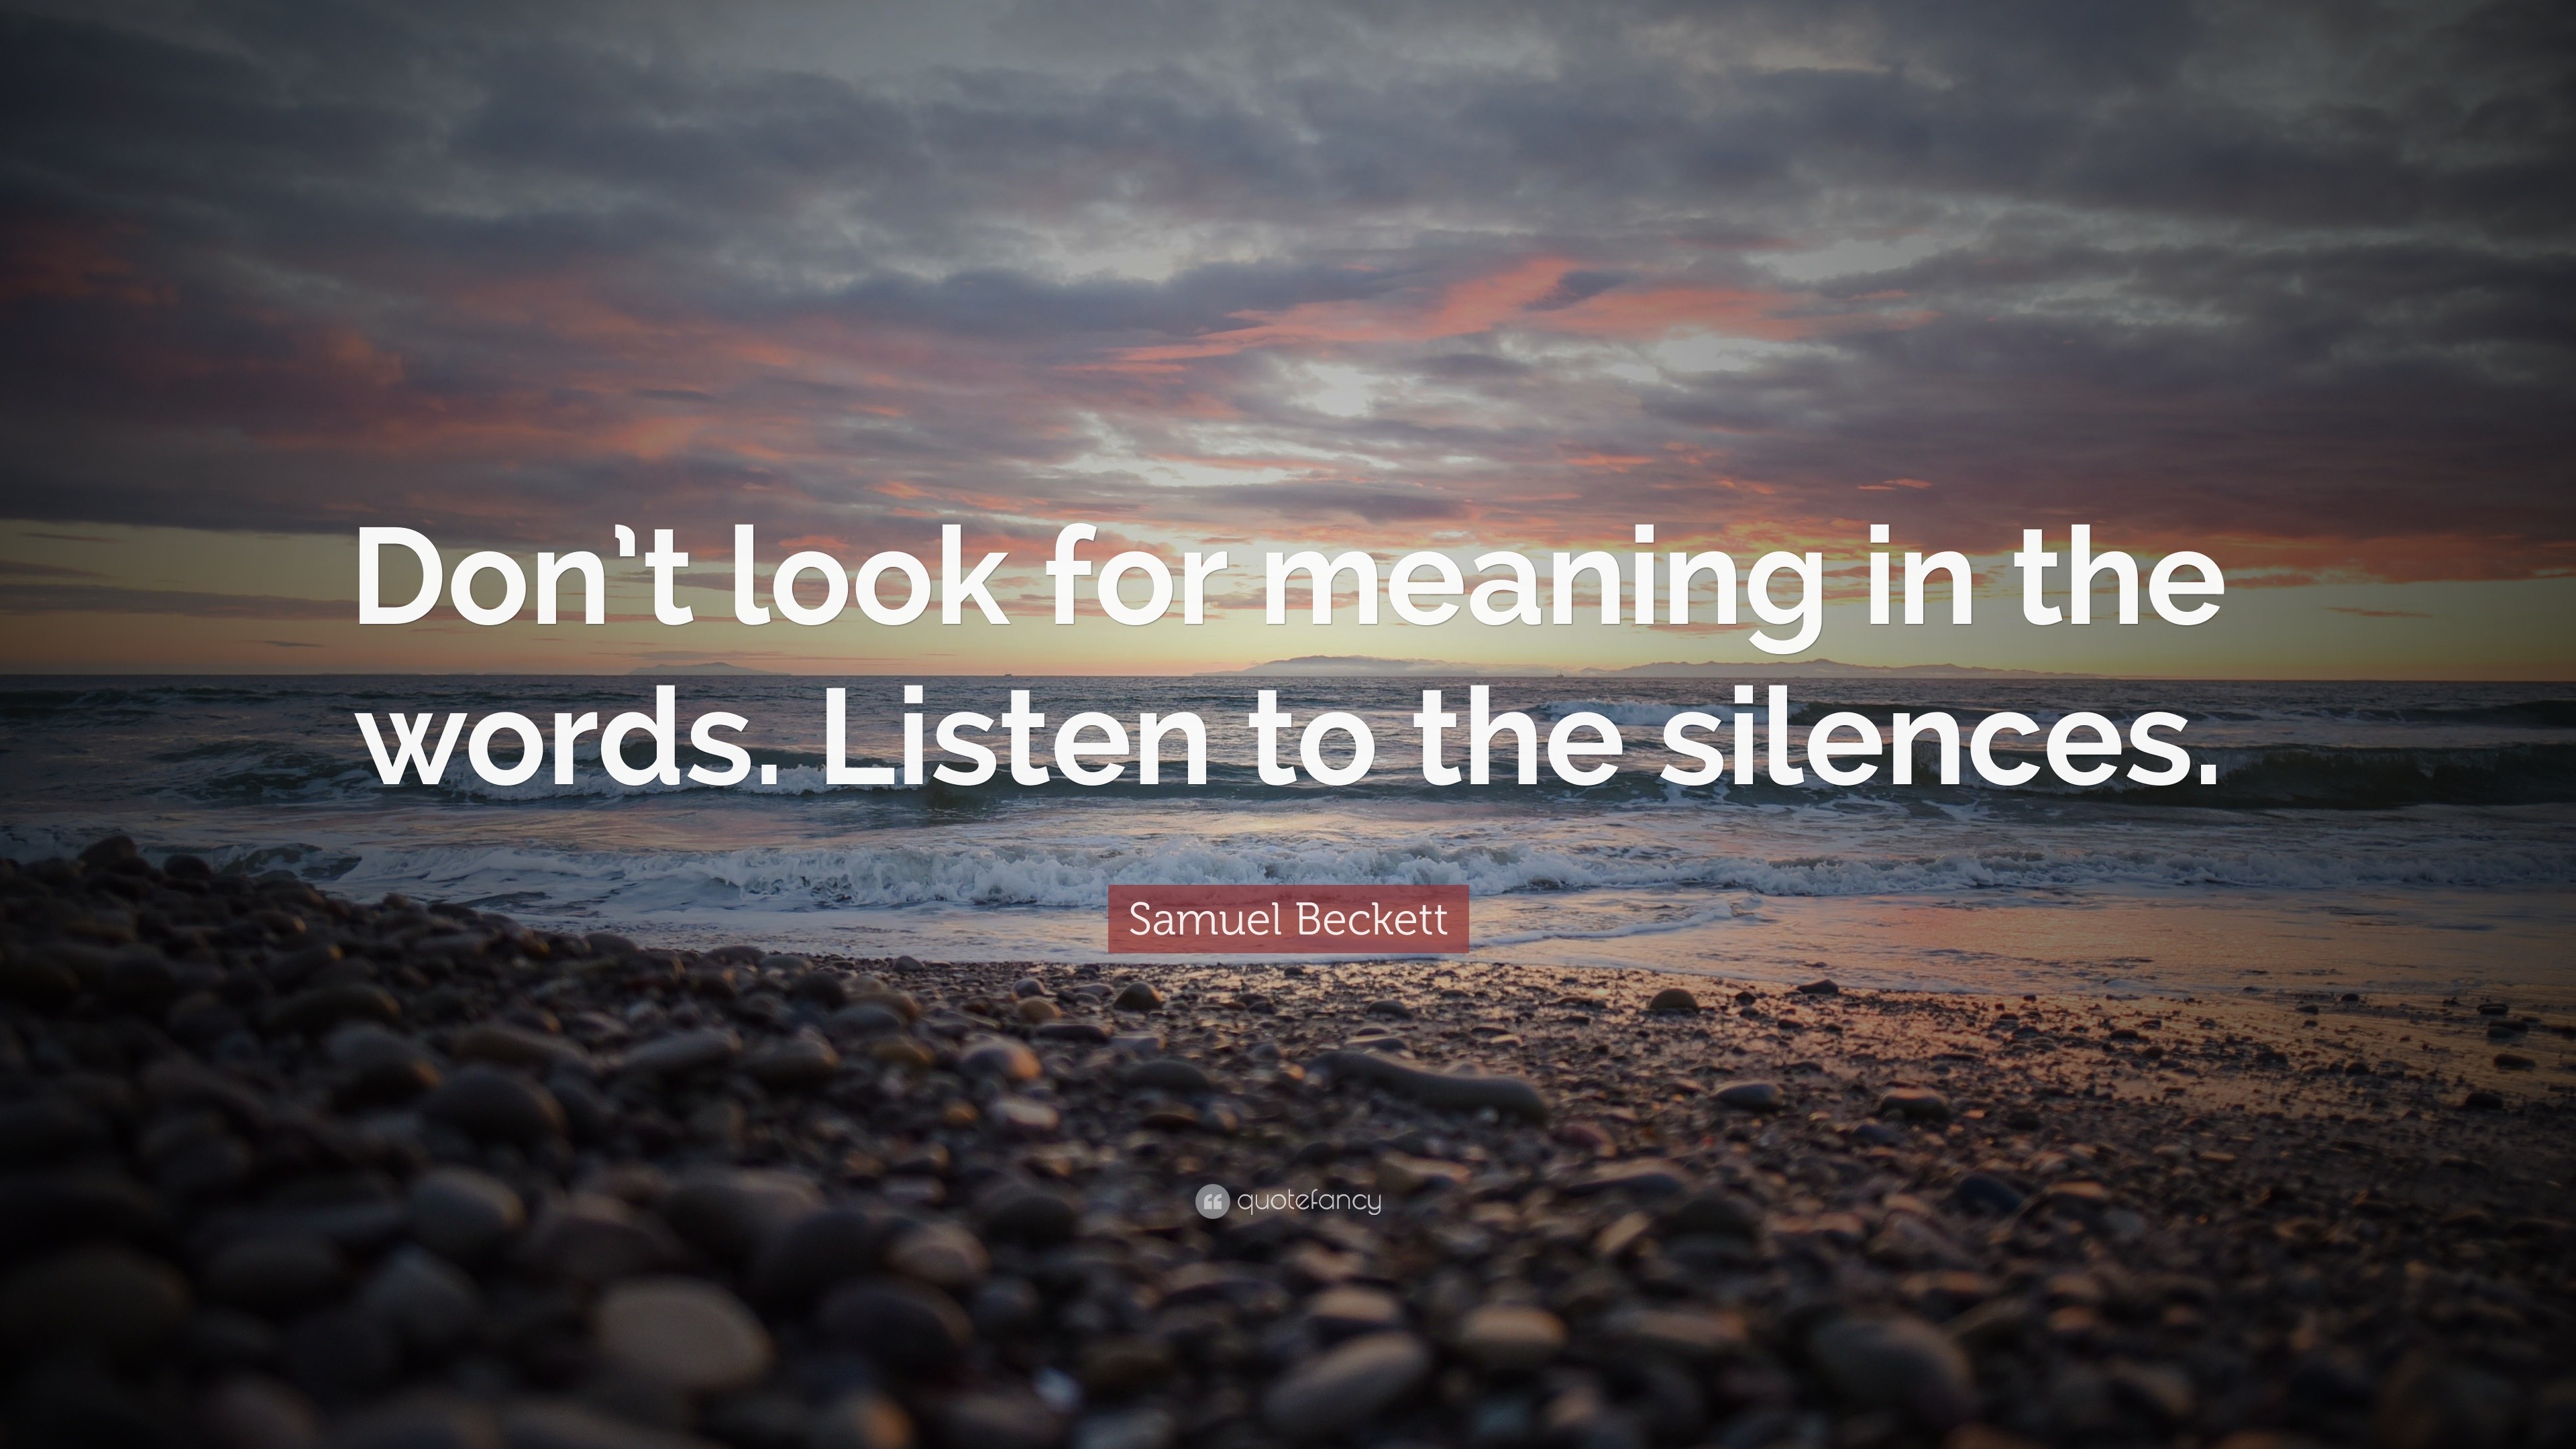 Samuel Beckett Quote: “Don't look for meaning in the words. Listen ...